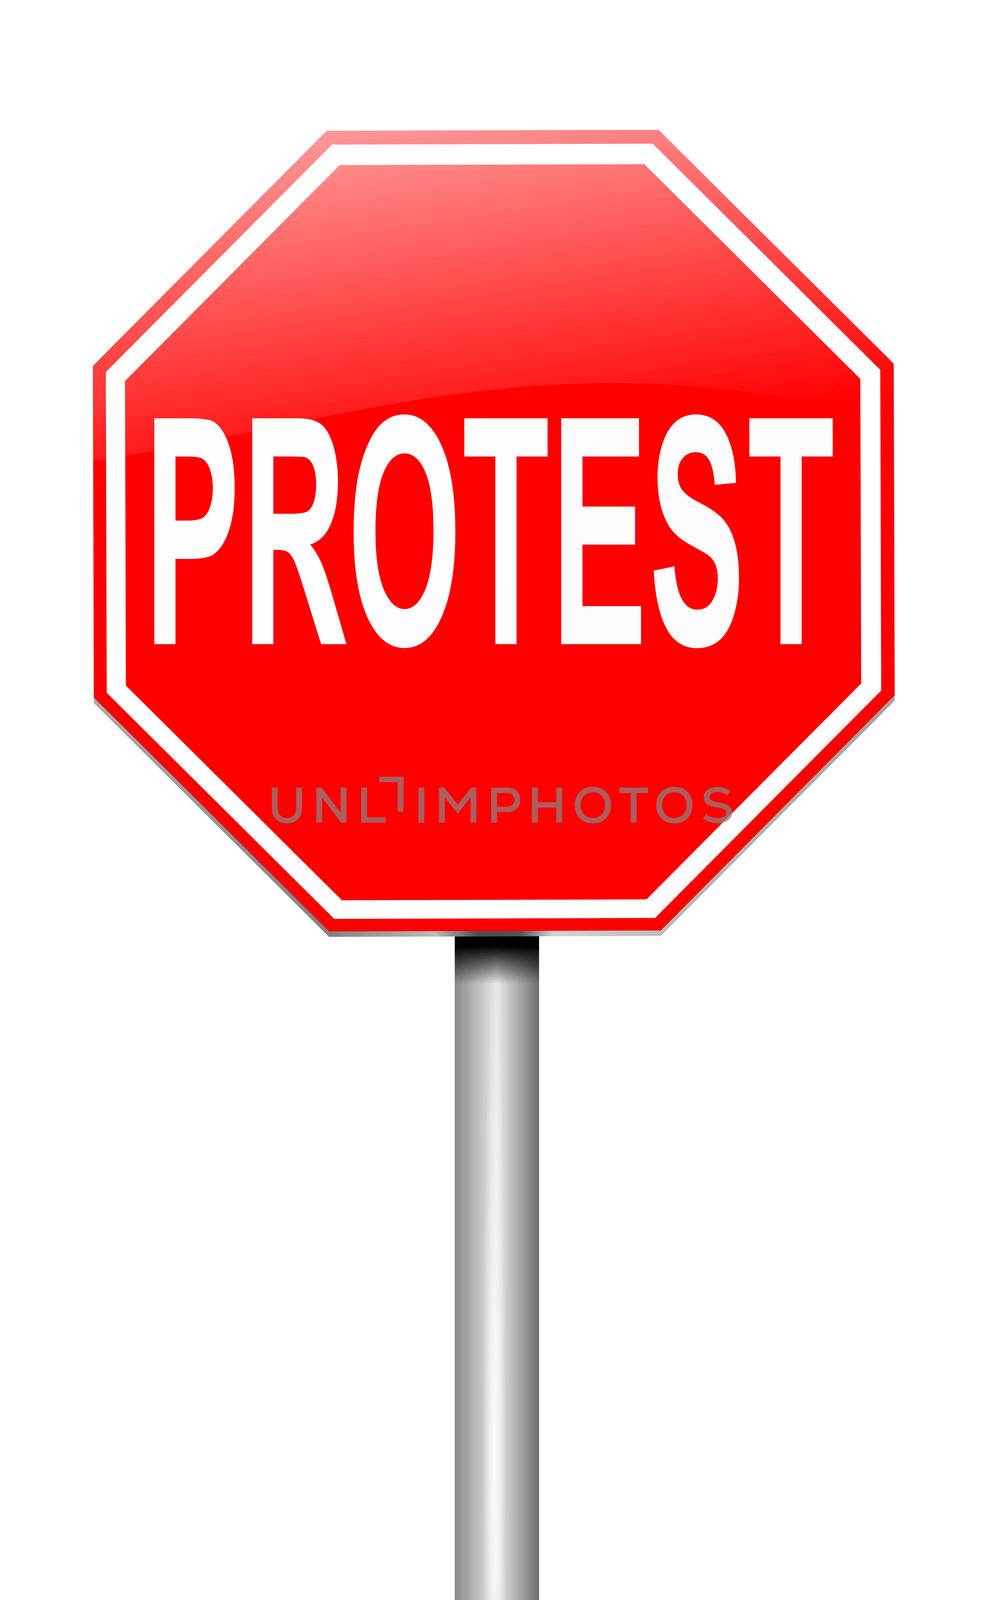 Protest concept. by 72soul